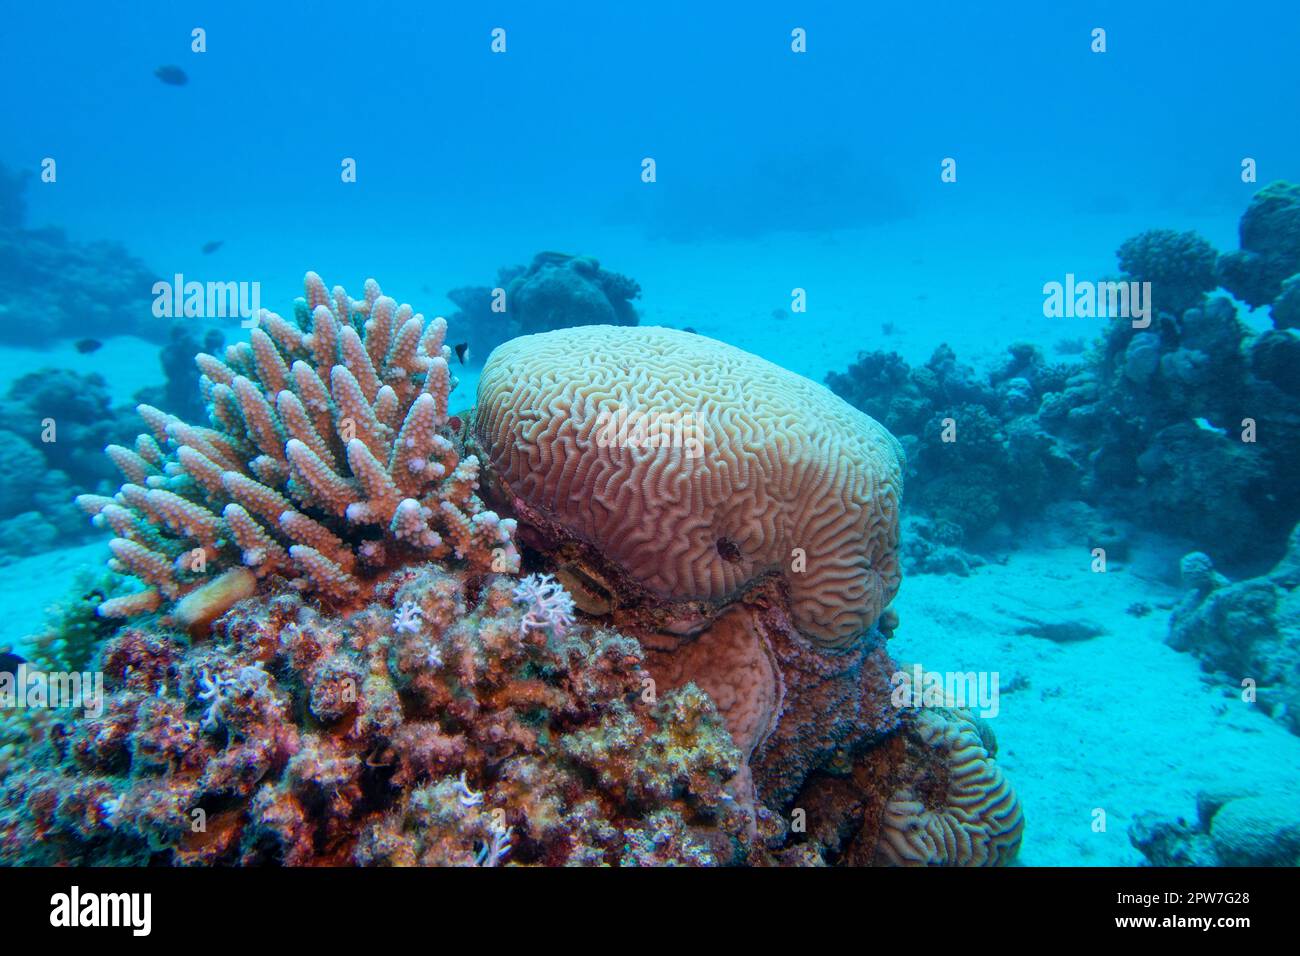 Colorful, picturesque coral reef at the bottom of tropical sea, brain coral, underwater landscape Stock Photo